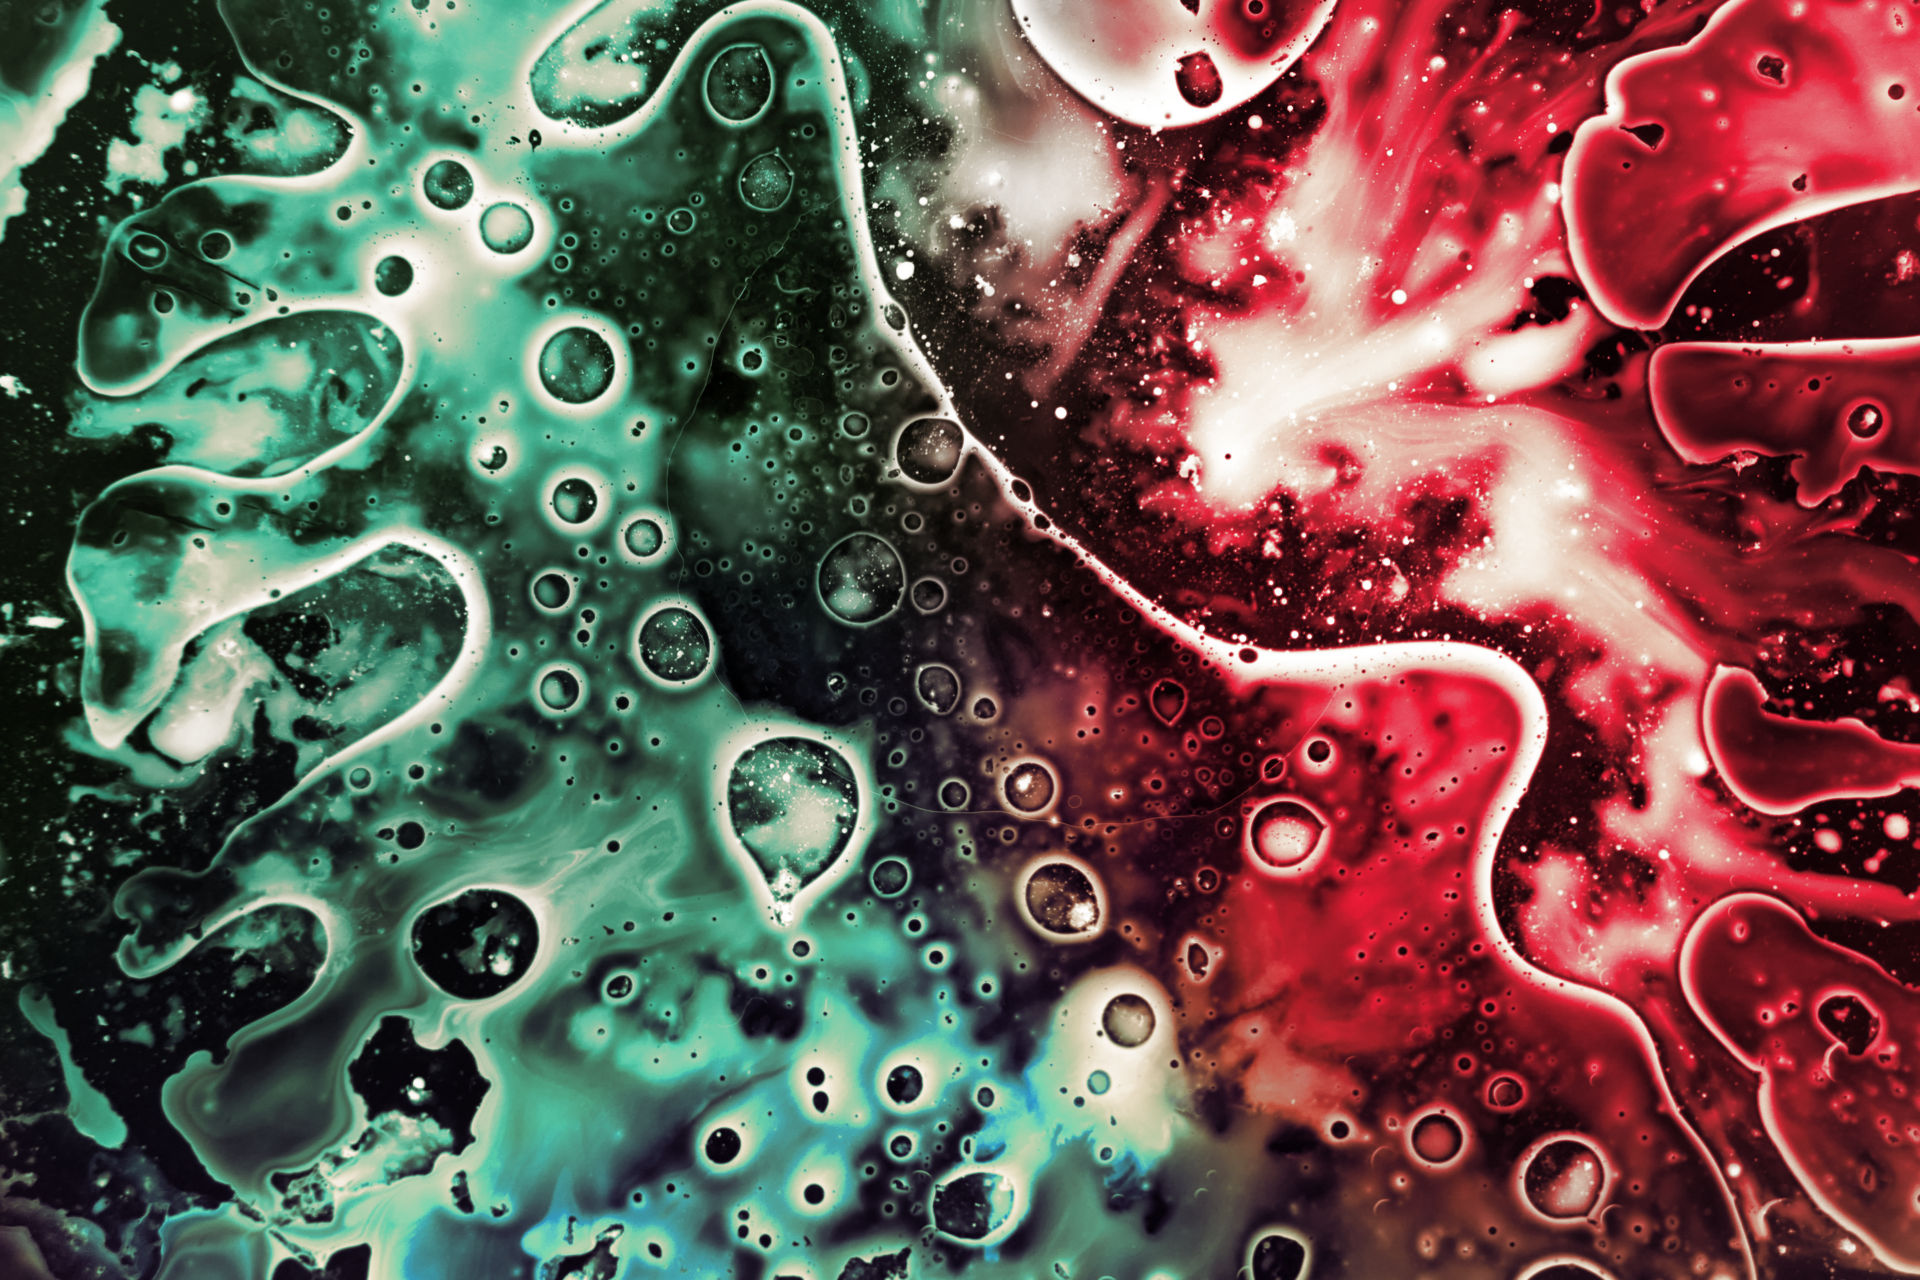 Green and red abstract painting with bubbles